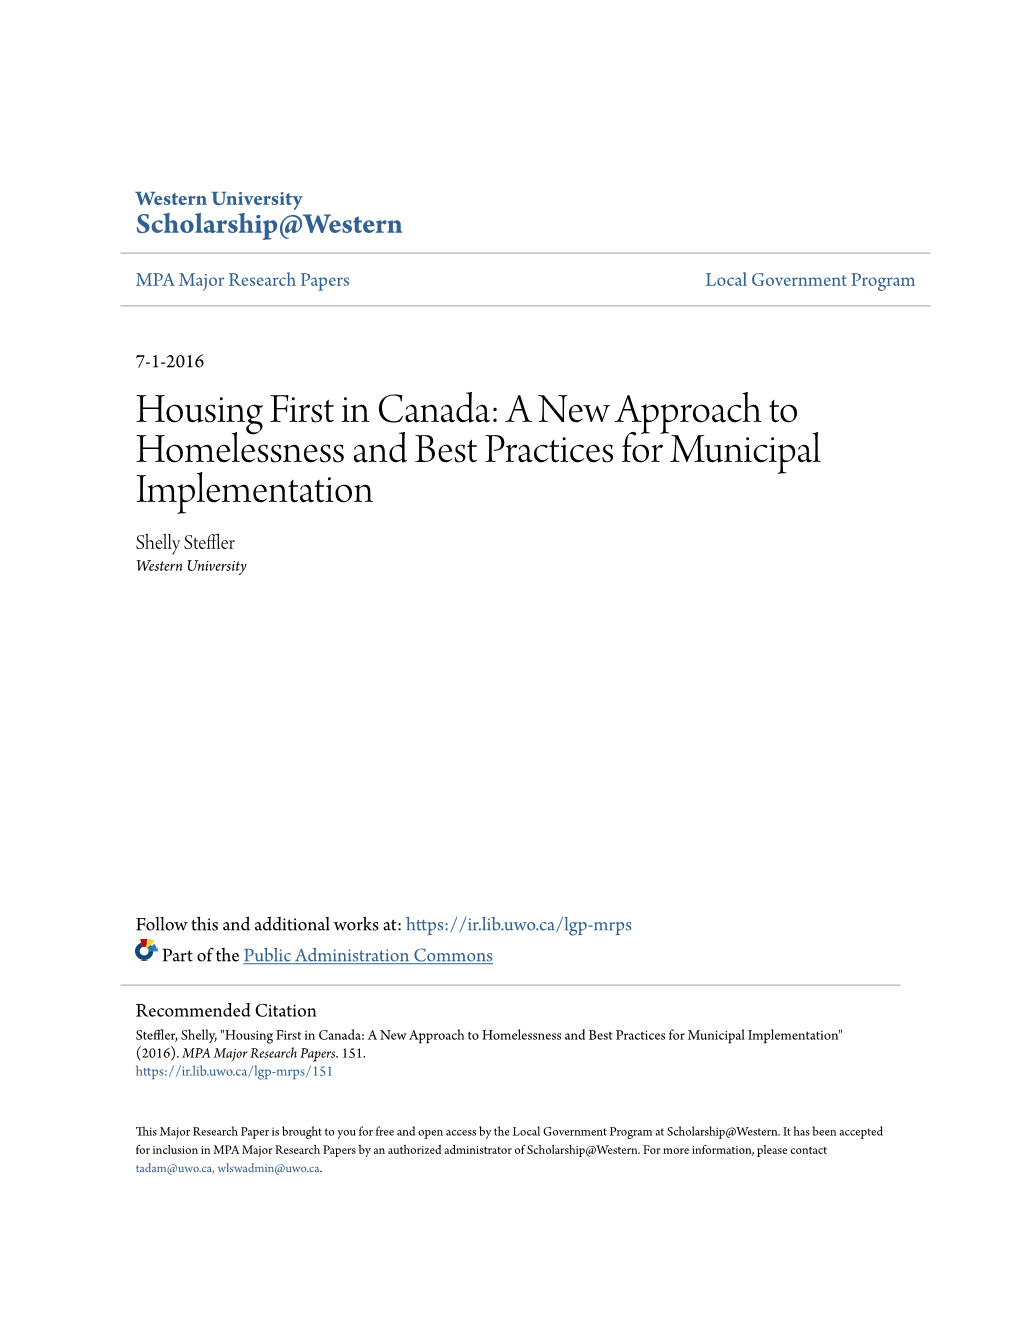 Housing First in Canada: a New Approach to Homelessness and Best Practices for Municipal Implementation Shelly Steffler Western University